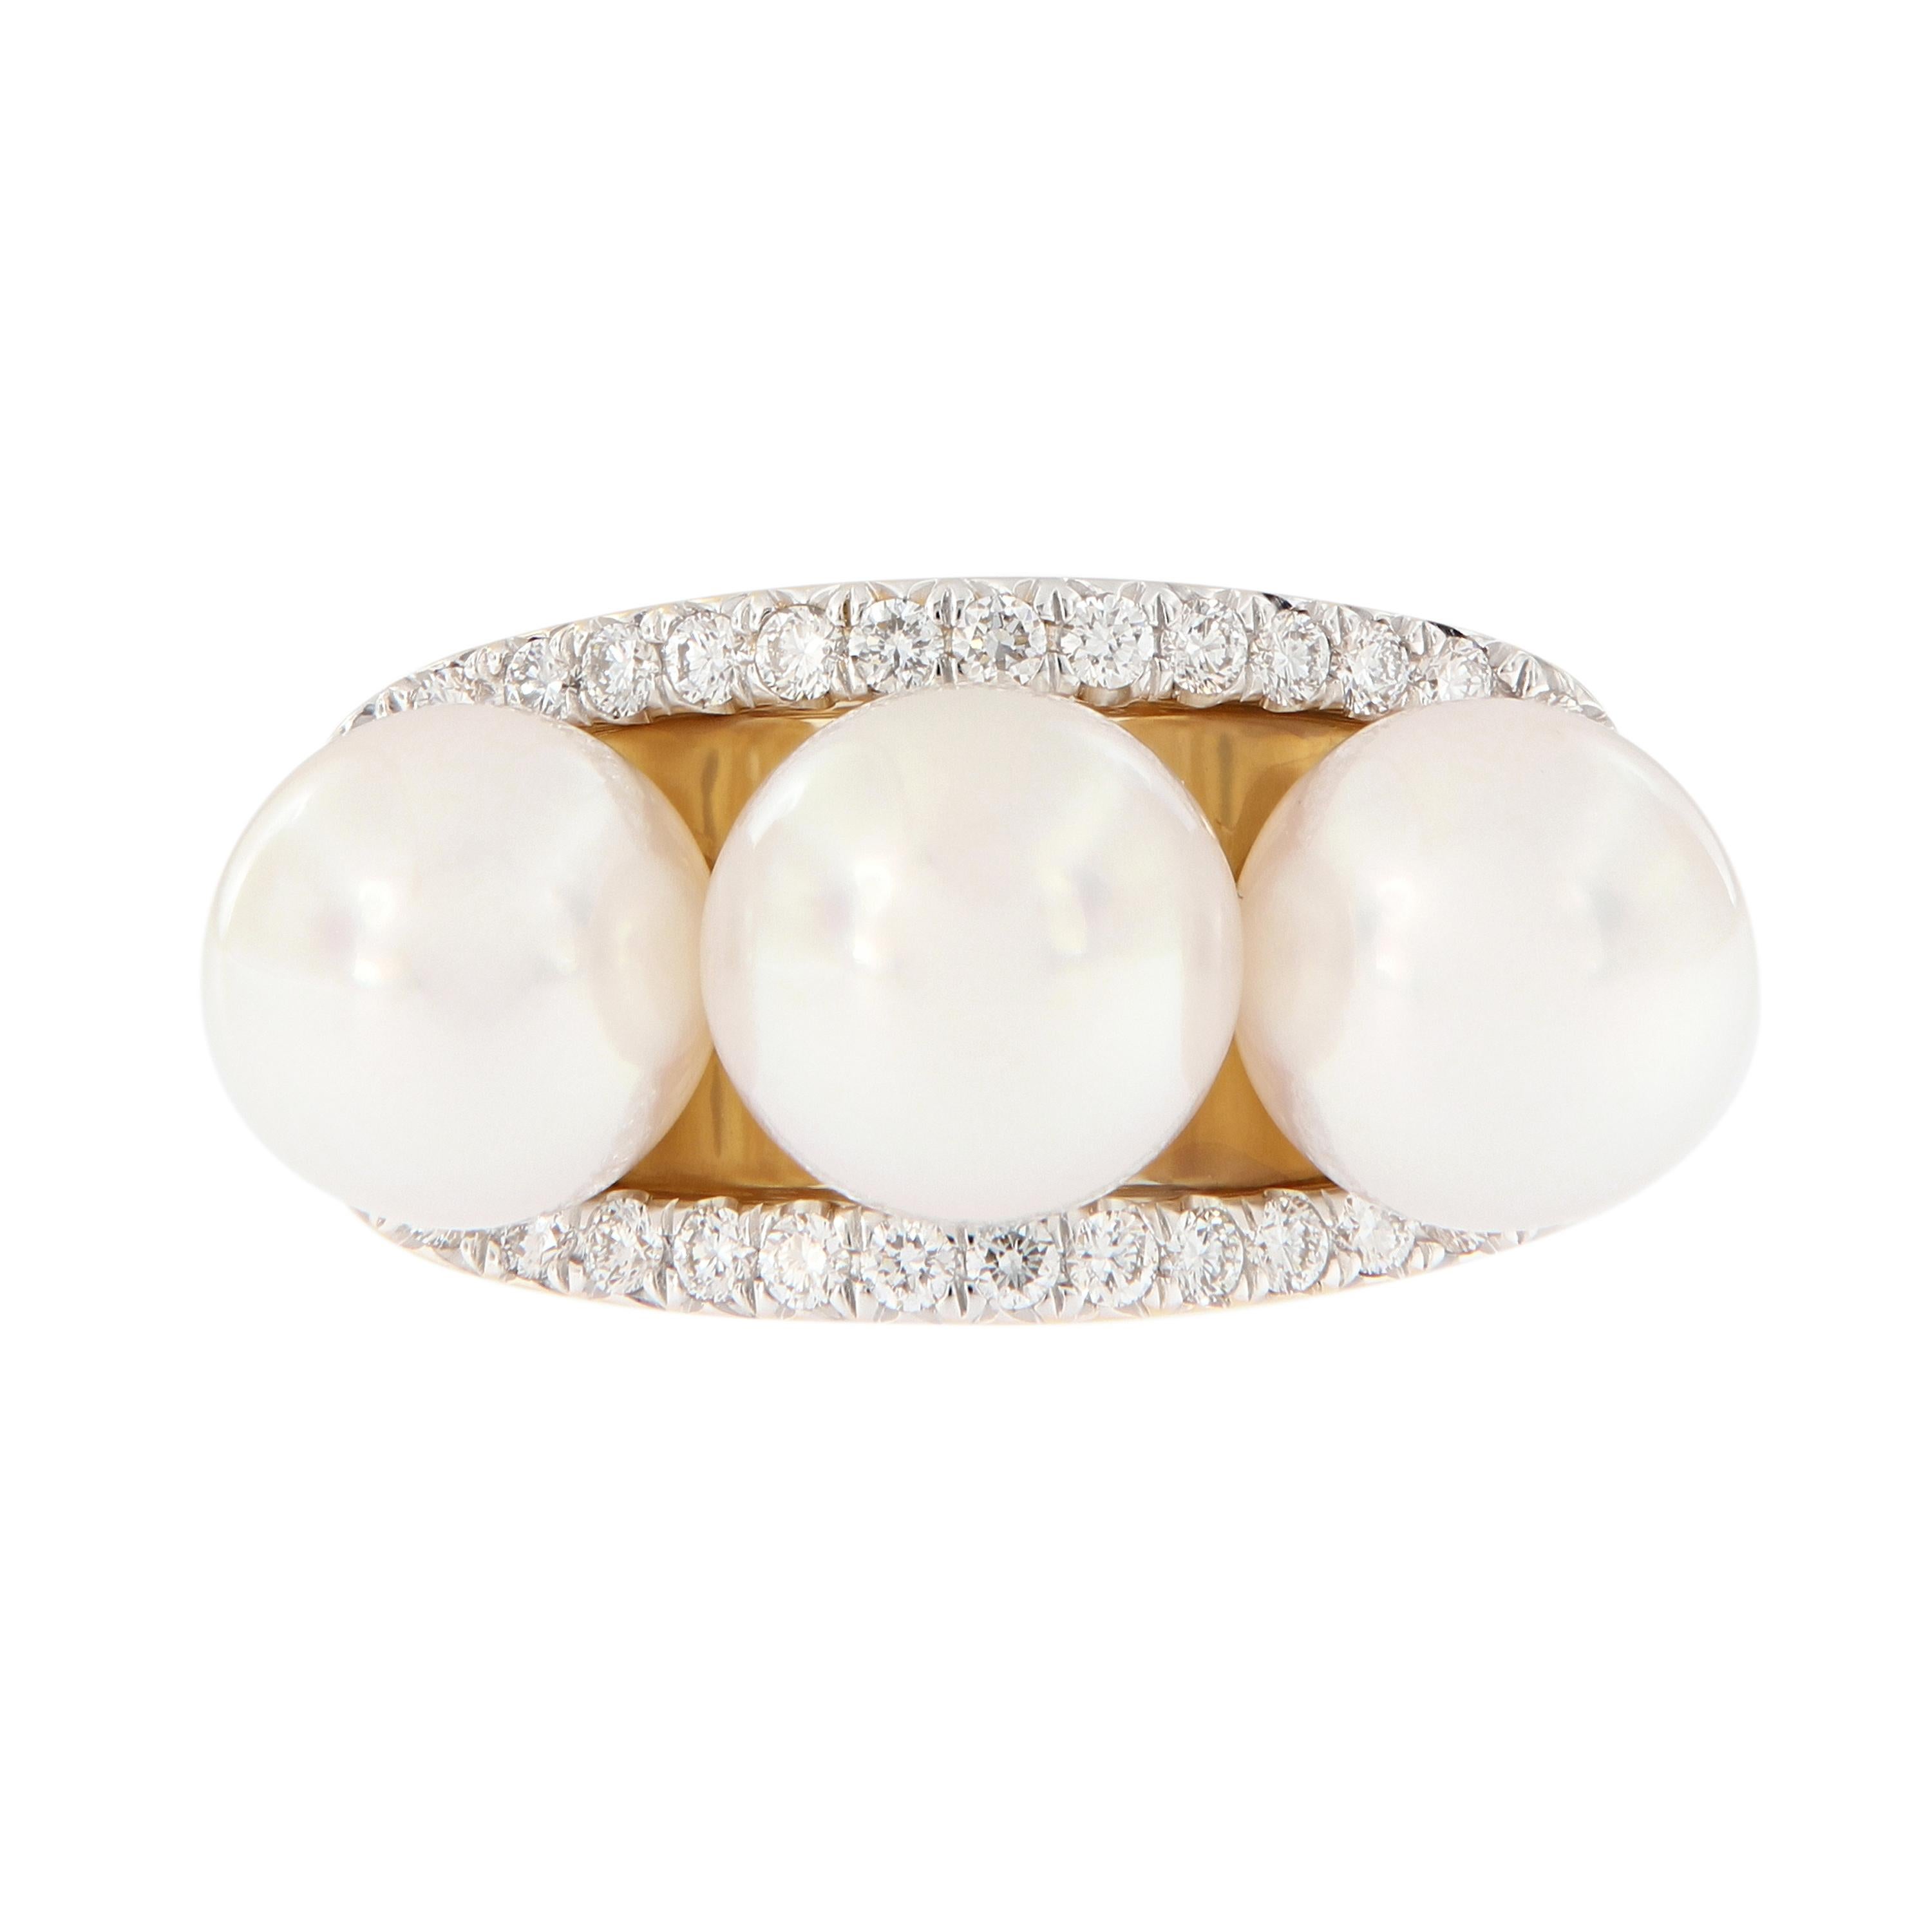 A trio of Akoya cultured pearls, accented with diamonds set in 18k yellow gold. From Assael of New York. Weighs 12.4 grams. Ring Size 6.75.
Marked Assael.

Pearls 8-8.5mm.
Diamonds 0.45 cttw.